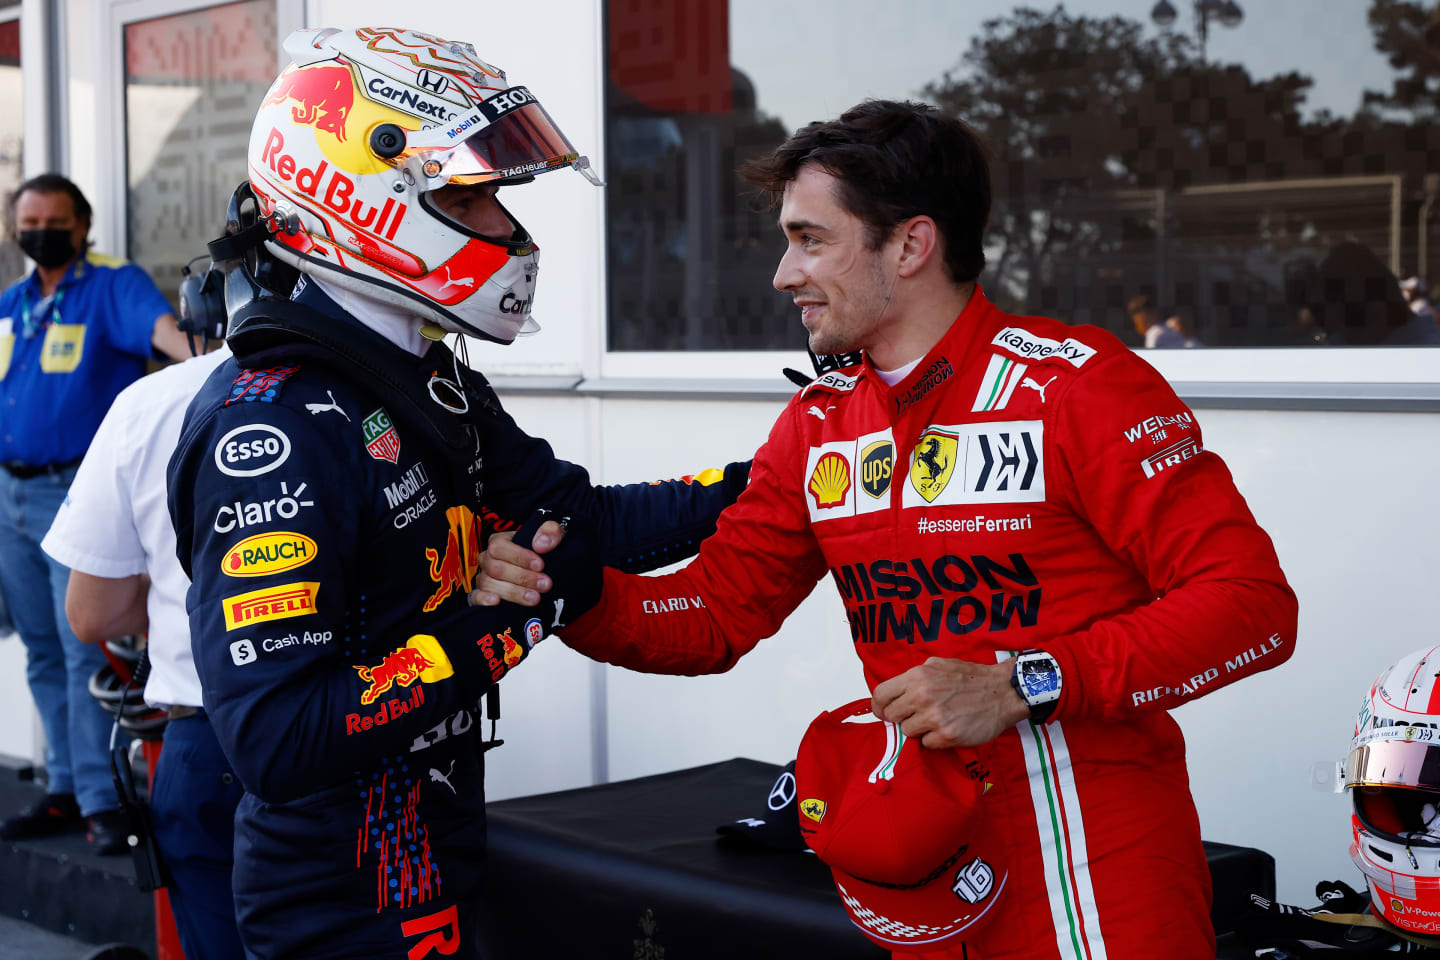 BAKU, AZERBAIJAN - JUNE 05: Third placed qualifier Max Verstappen of Netherlands and Red Bull Racing shakes hands with pole position qualifier Charles Leclerc of Monaco and Ferrari in parc ferme during qualifying ahead of the F1 Grand Prix of Azerbaijan at Baku City Circuit on June 05, 2021 in Baku, Azerbaijan. (Photo by Maxim Shemetov - Pool/Getty Images)